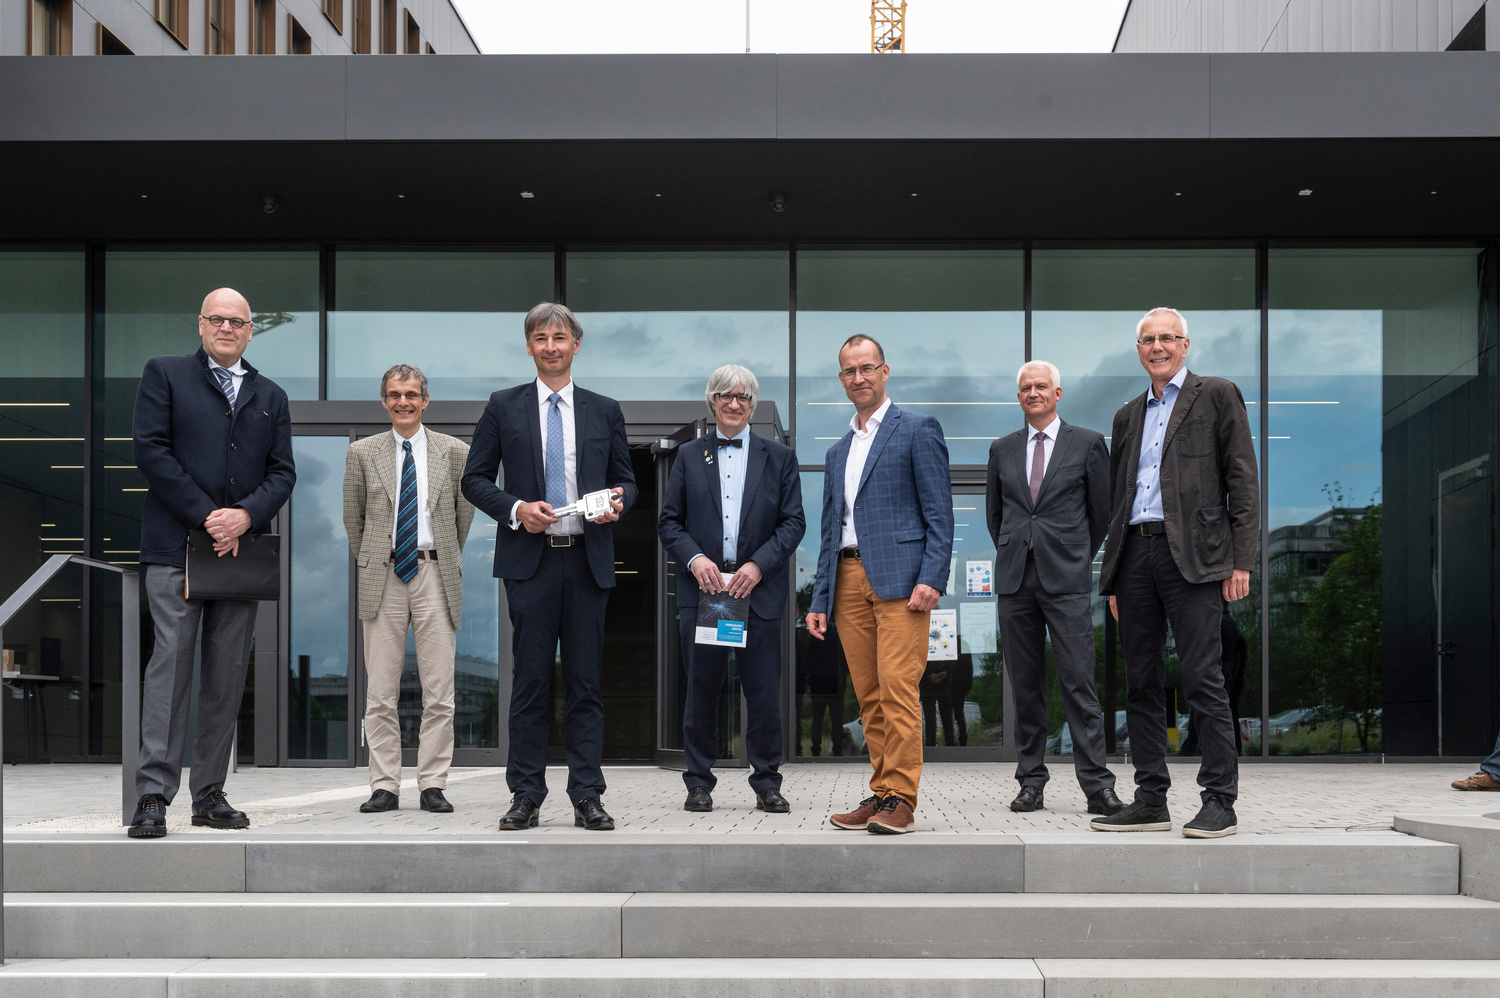 From left to right: Professor Wolfgang Brück, UMG, Professor Christian Griesinger, MPI for Biophysical Chemistry, Professor Ramin Yahyapour, GWDG, Professor Metin Tolan and Professor Norbert Lossau, Presidential Board of the University of Göttingen, Stefan Jungeblodt, Lower Saxony Ministry of Science and Culture, Rainer Bolli, Facility Management of the University of Göttingen.